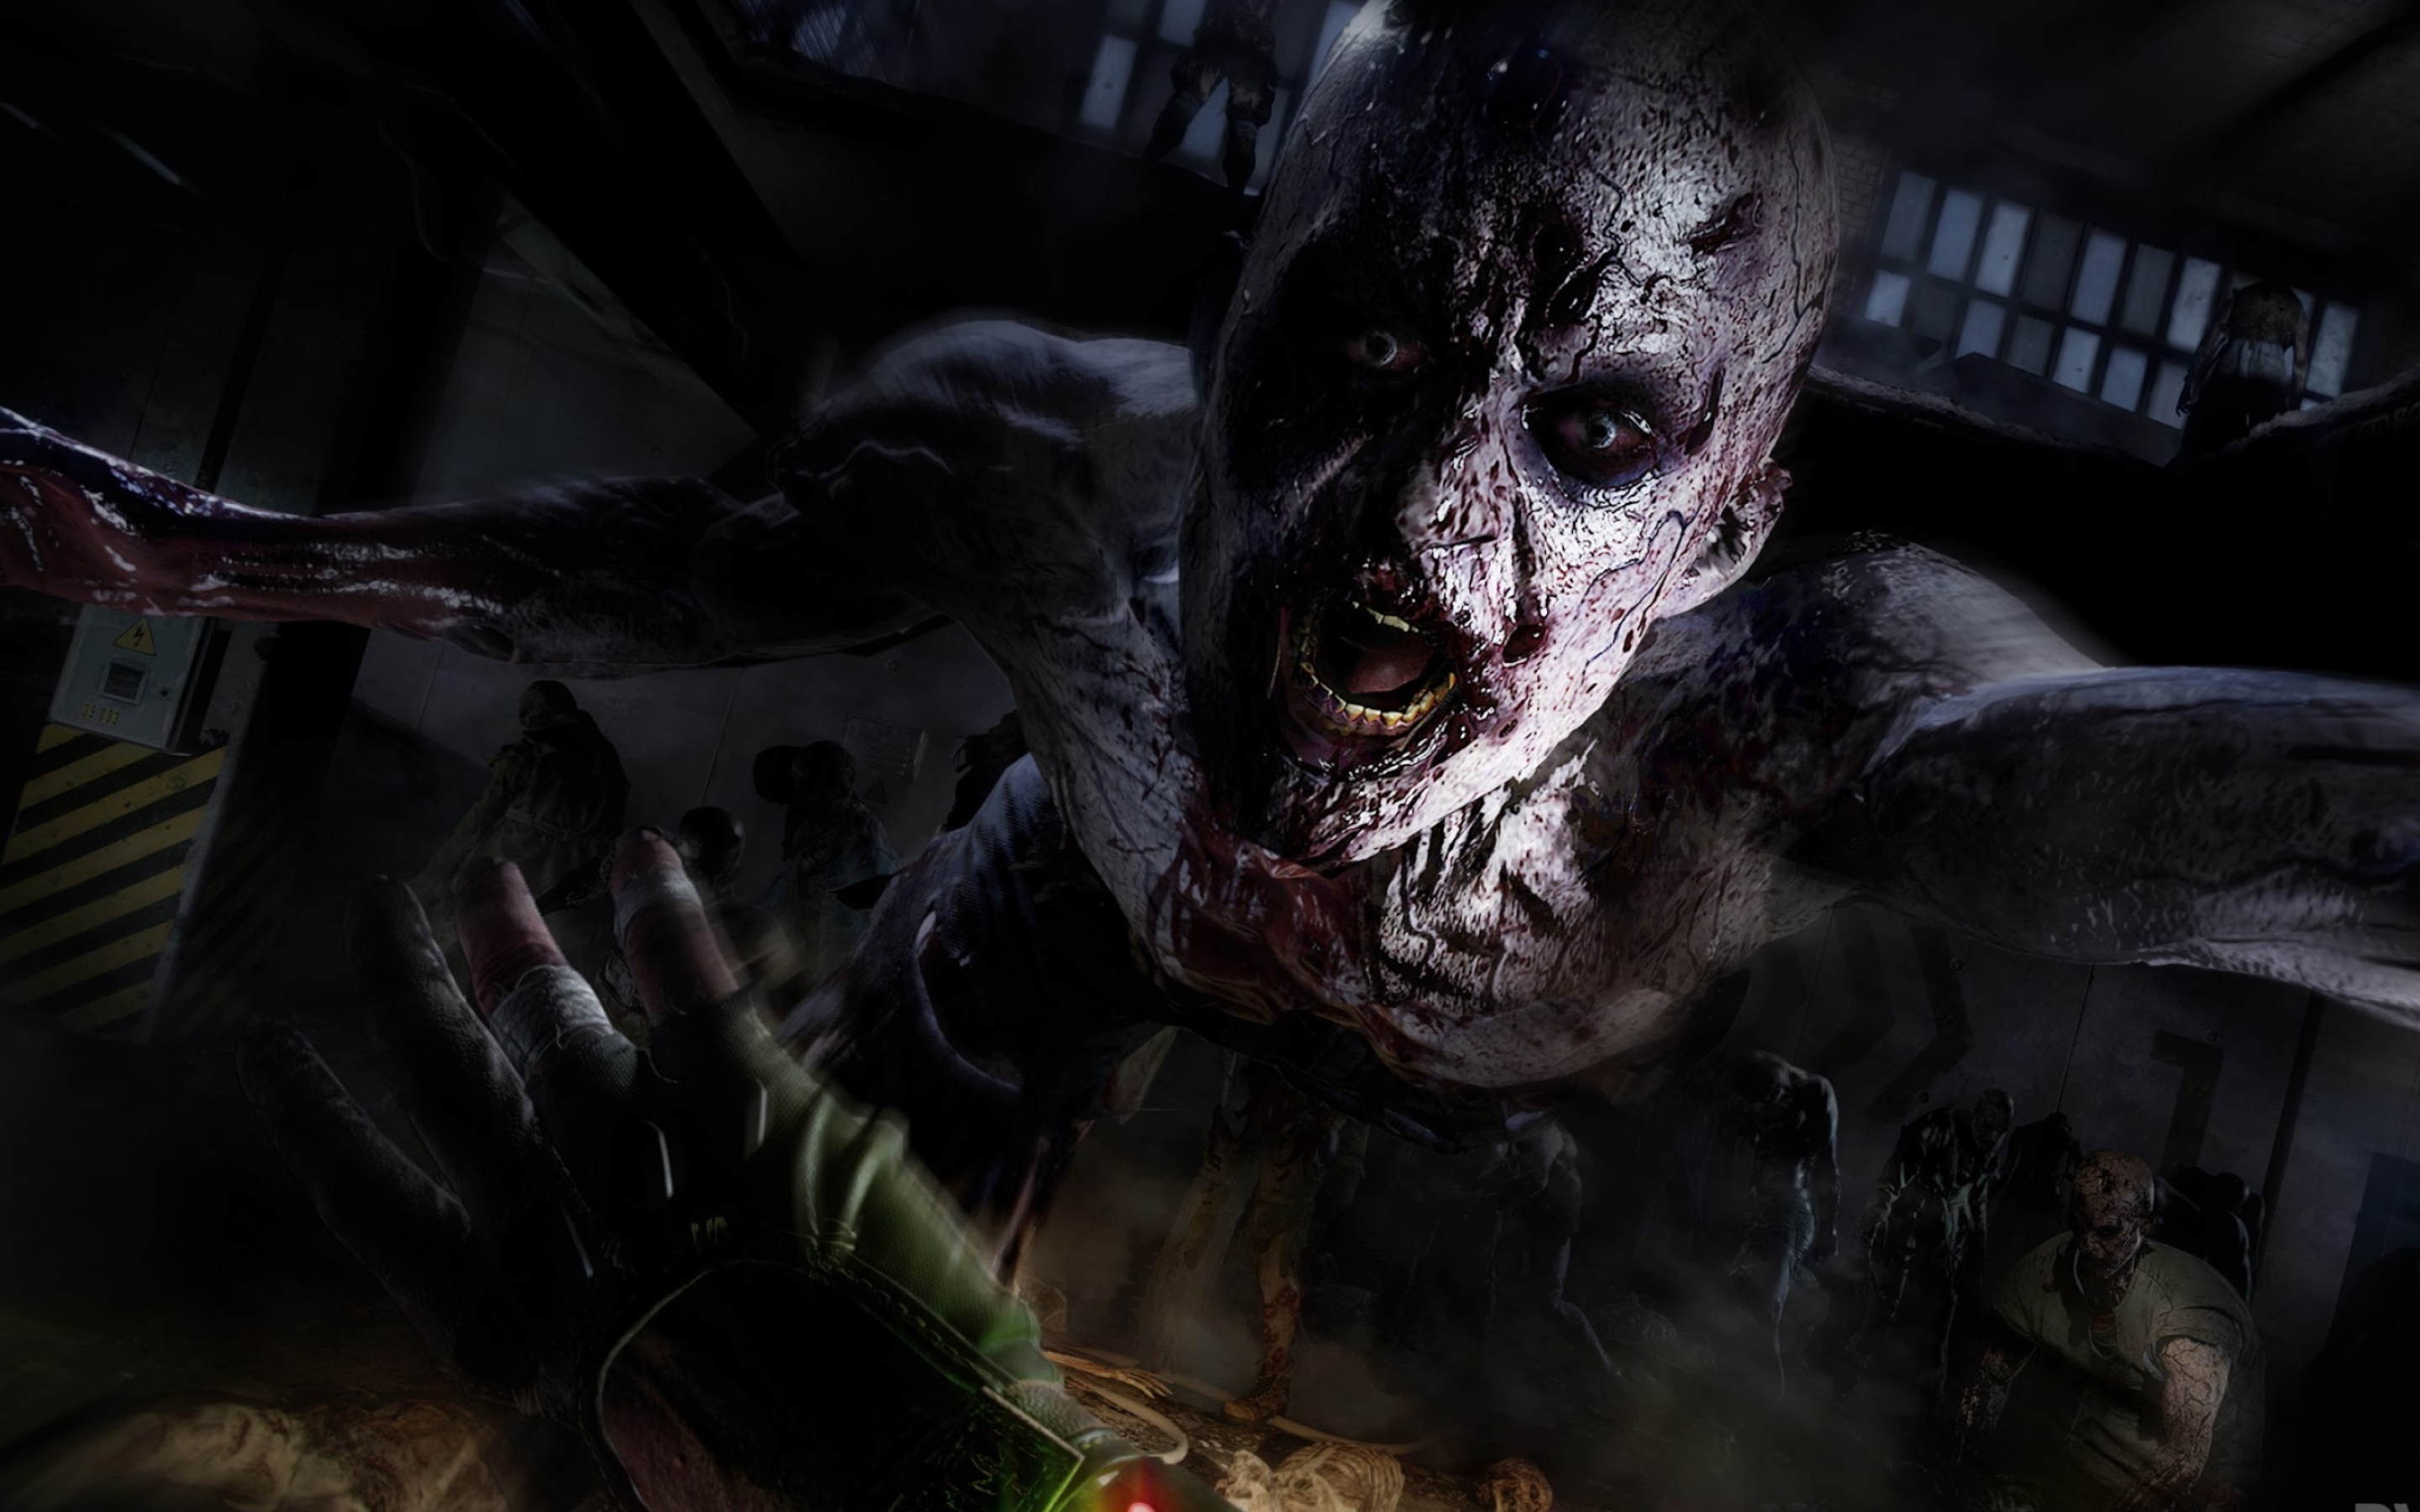 Dying Light 2, Zombie-infested world, Post-apocalyptic setting, Haunting visuals, 2880x1800 HD Desktop